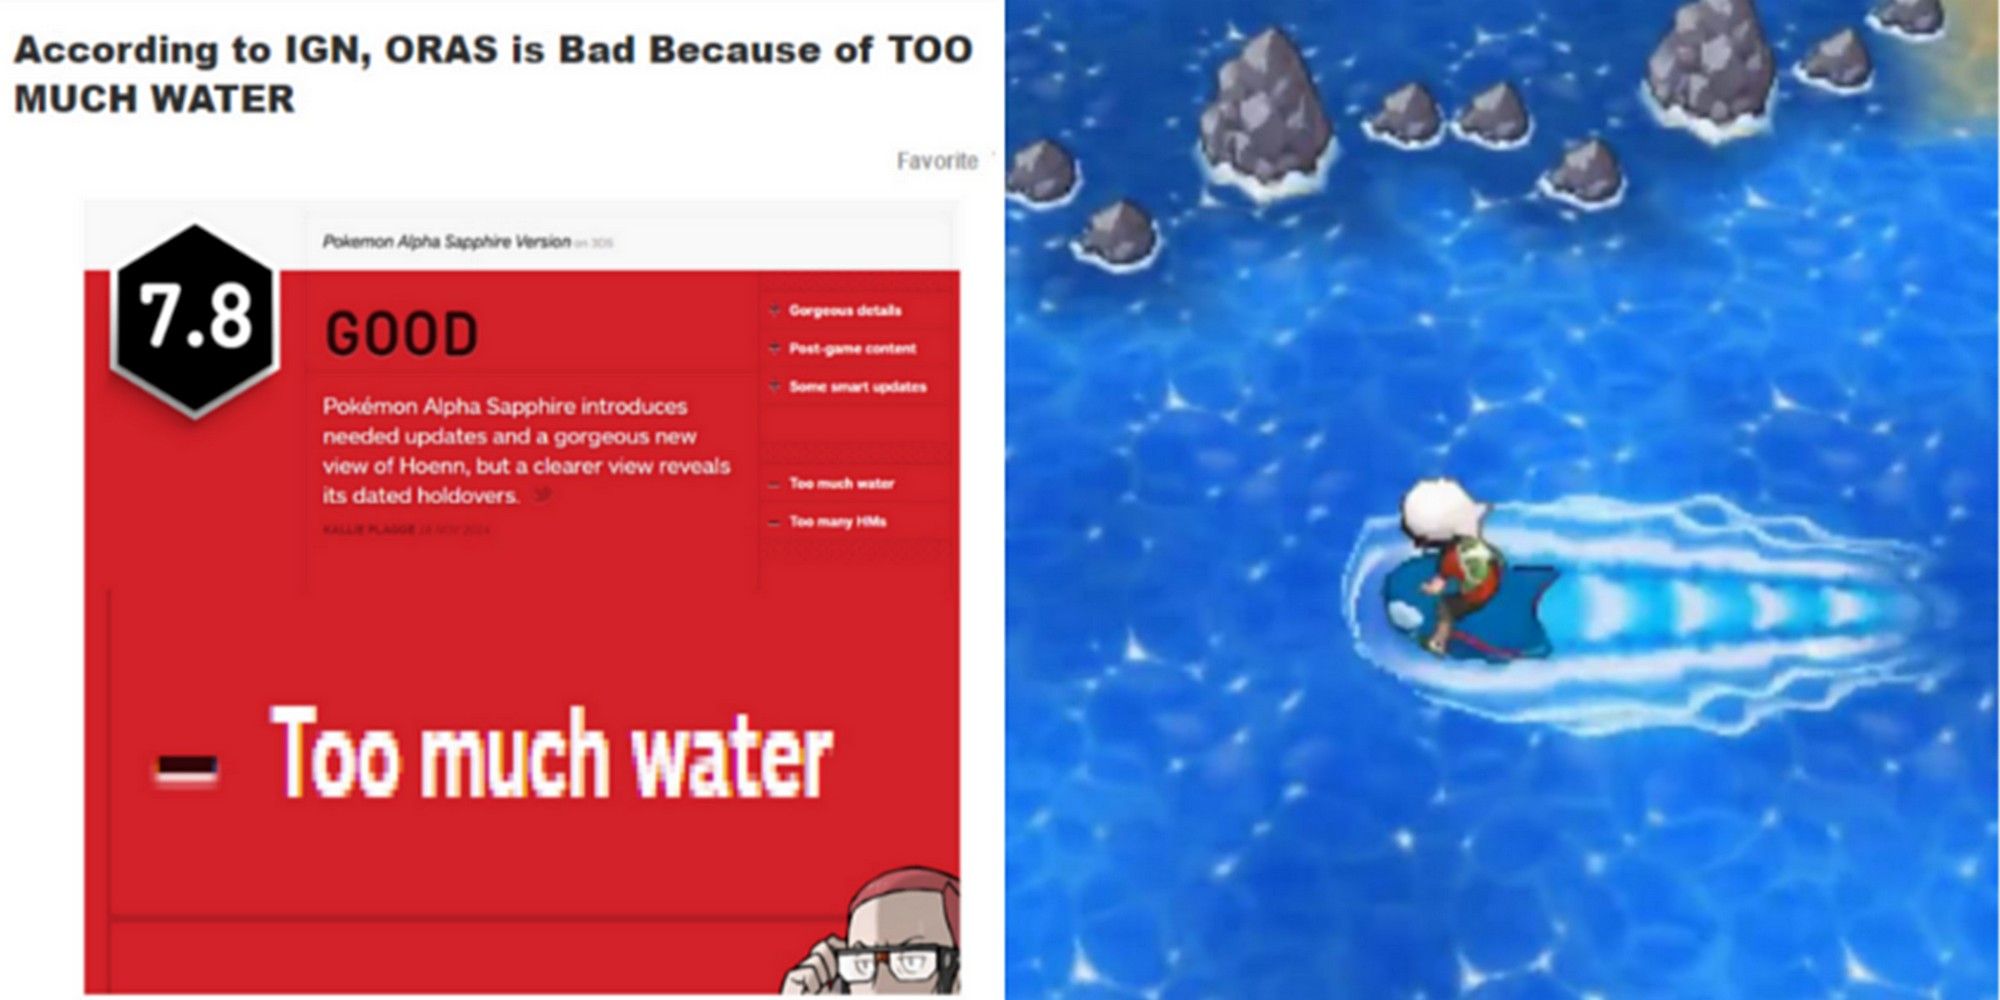 pokemon too much water kyogre alpha sapphire review